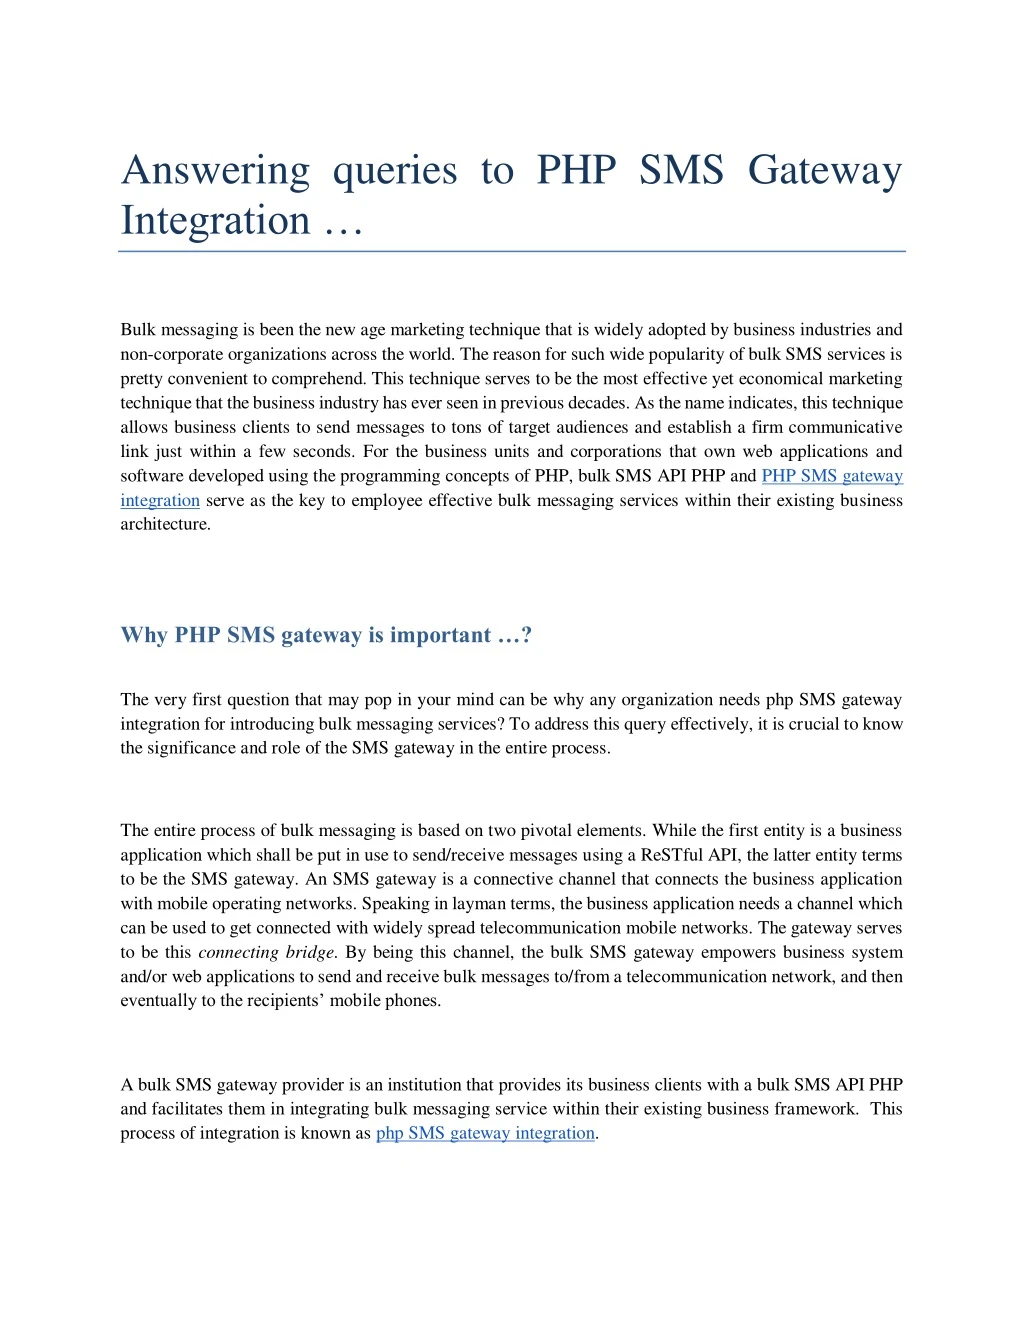 answering queries to php sms gateway integration